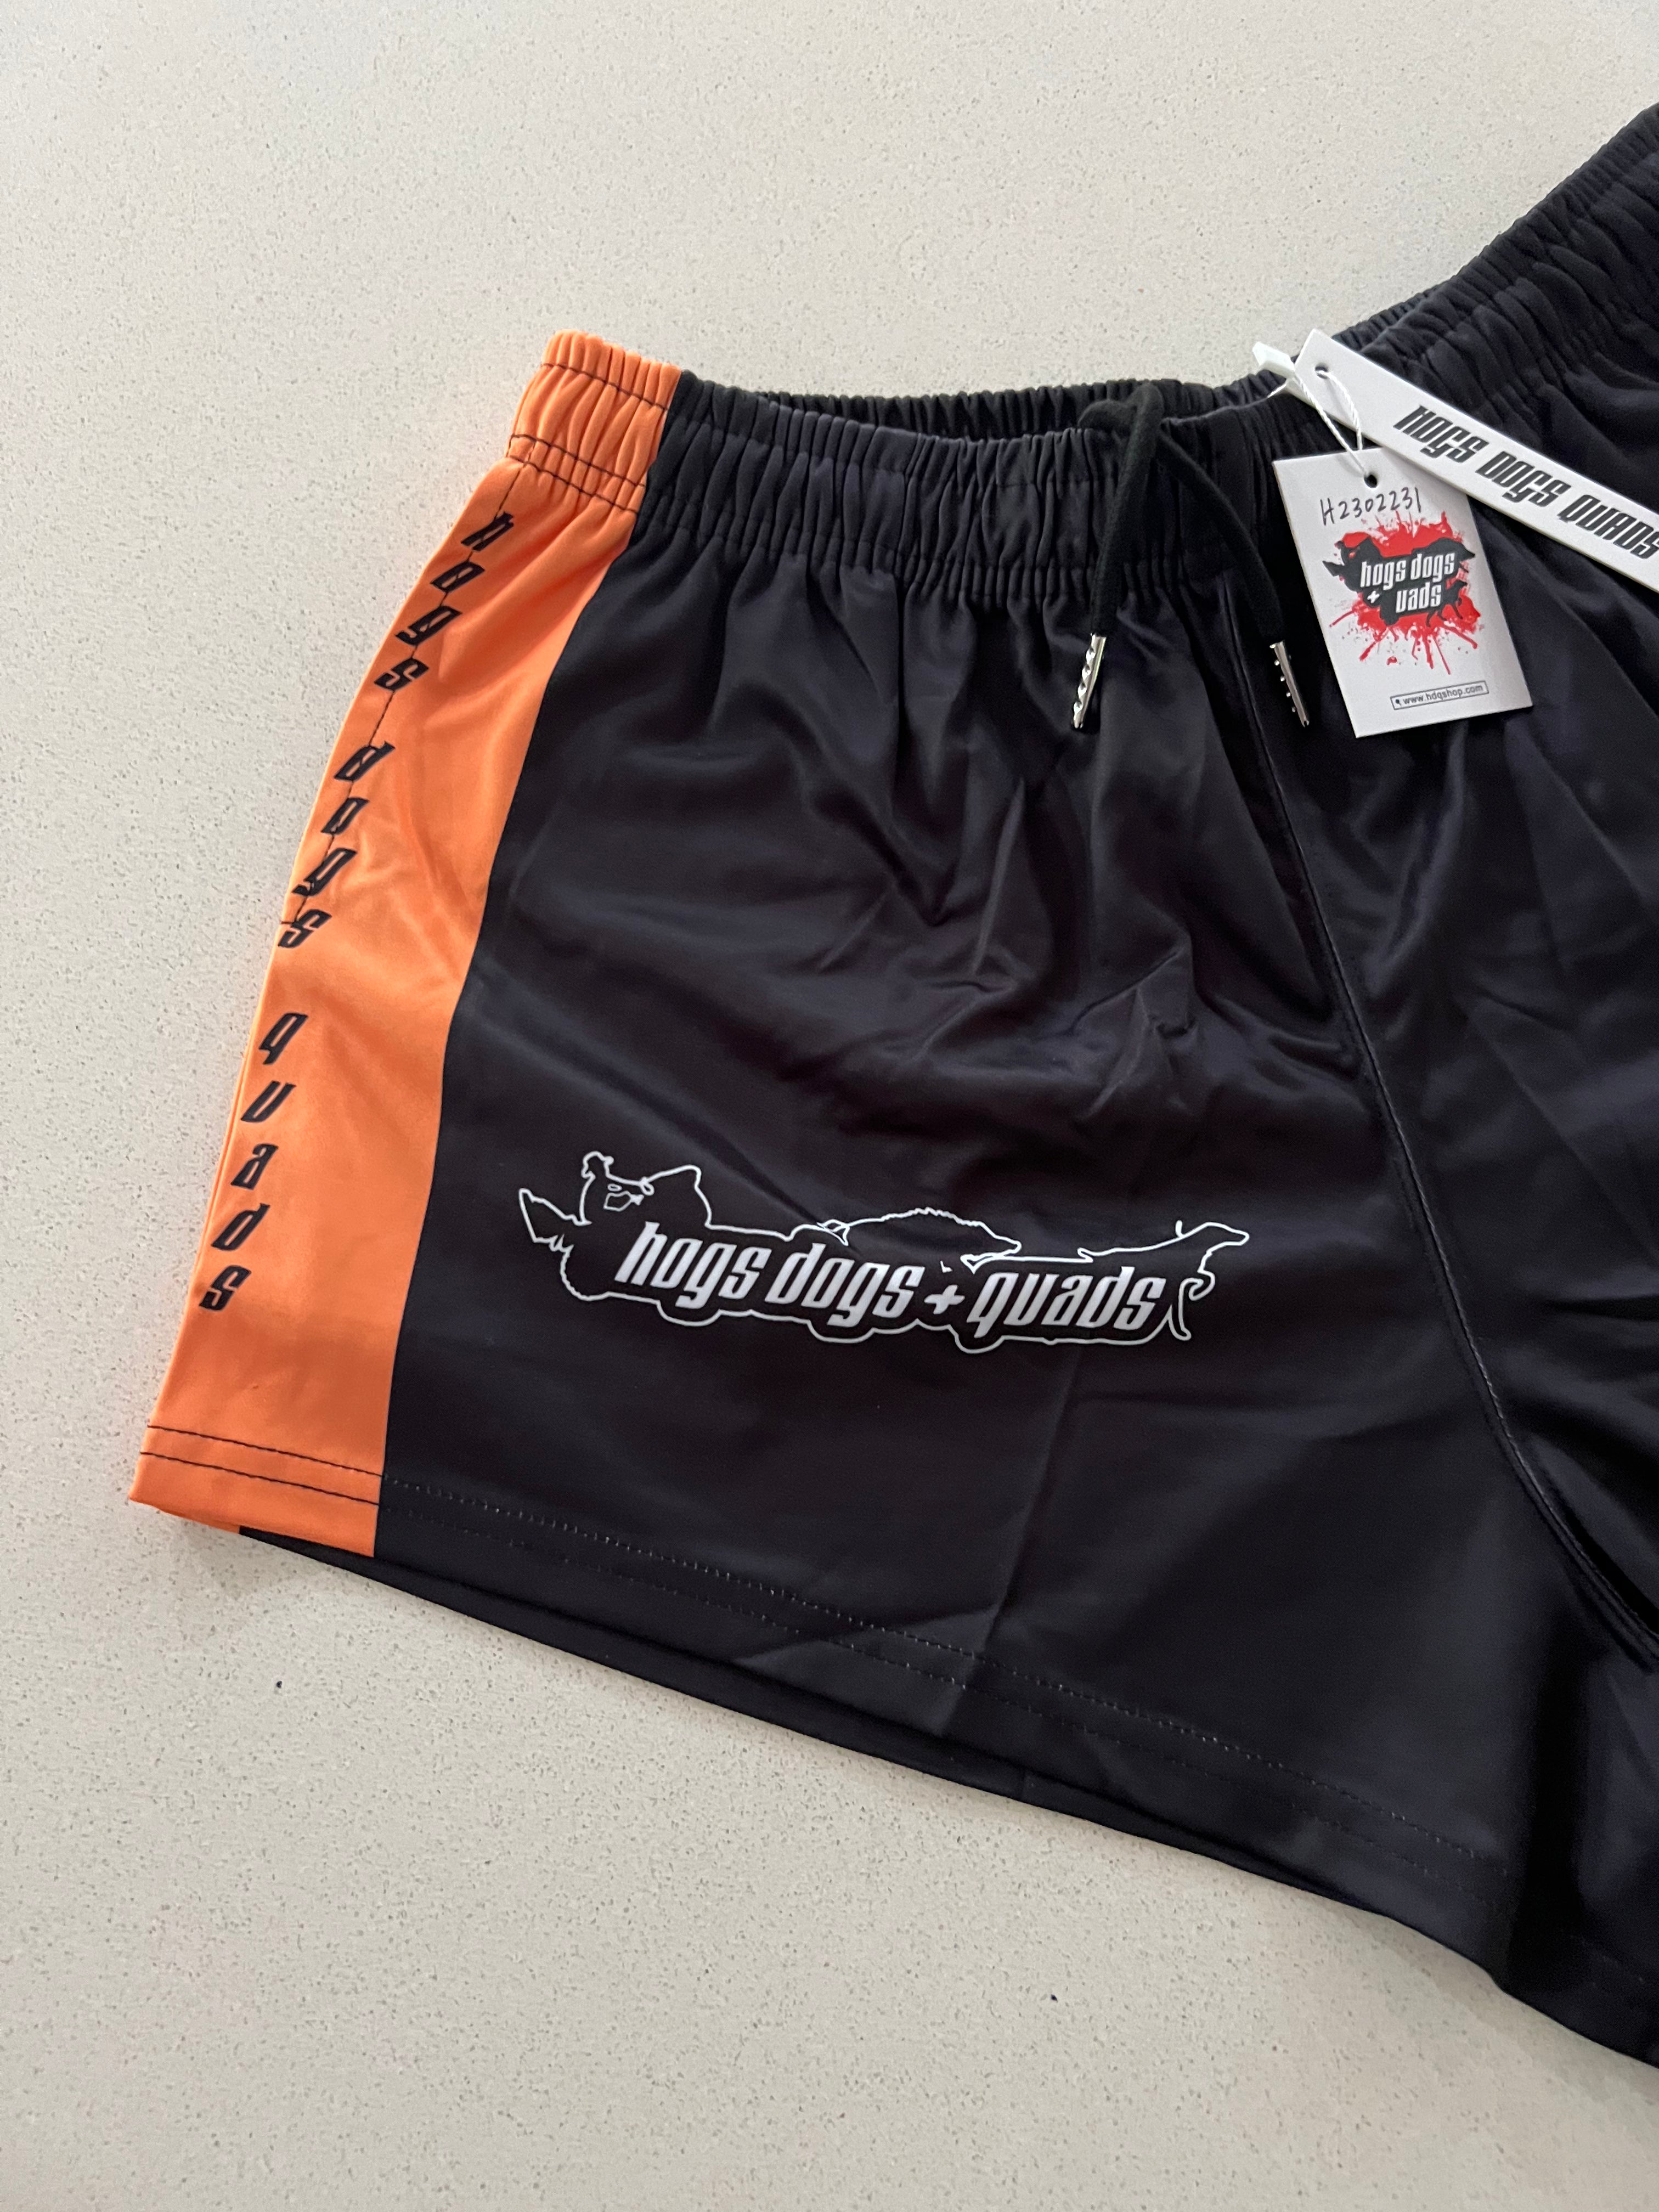 🔥NEW🔥 Cruiser Rig Footy Shorts - WITH POCKETS - Hogs Dogs Quads Shop